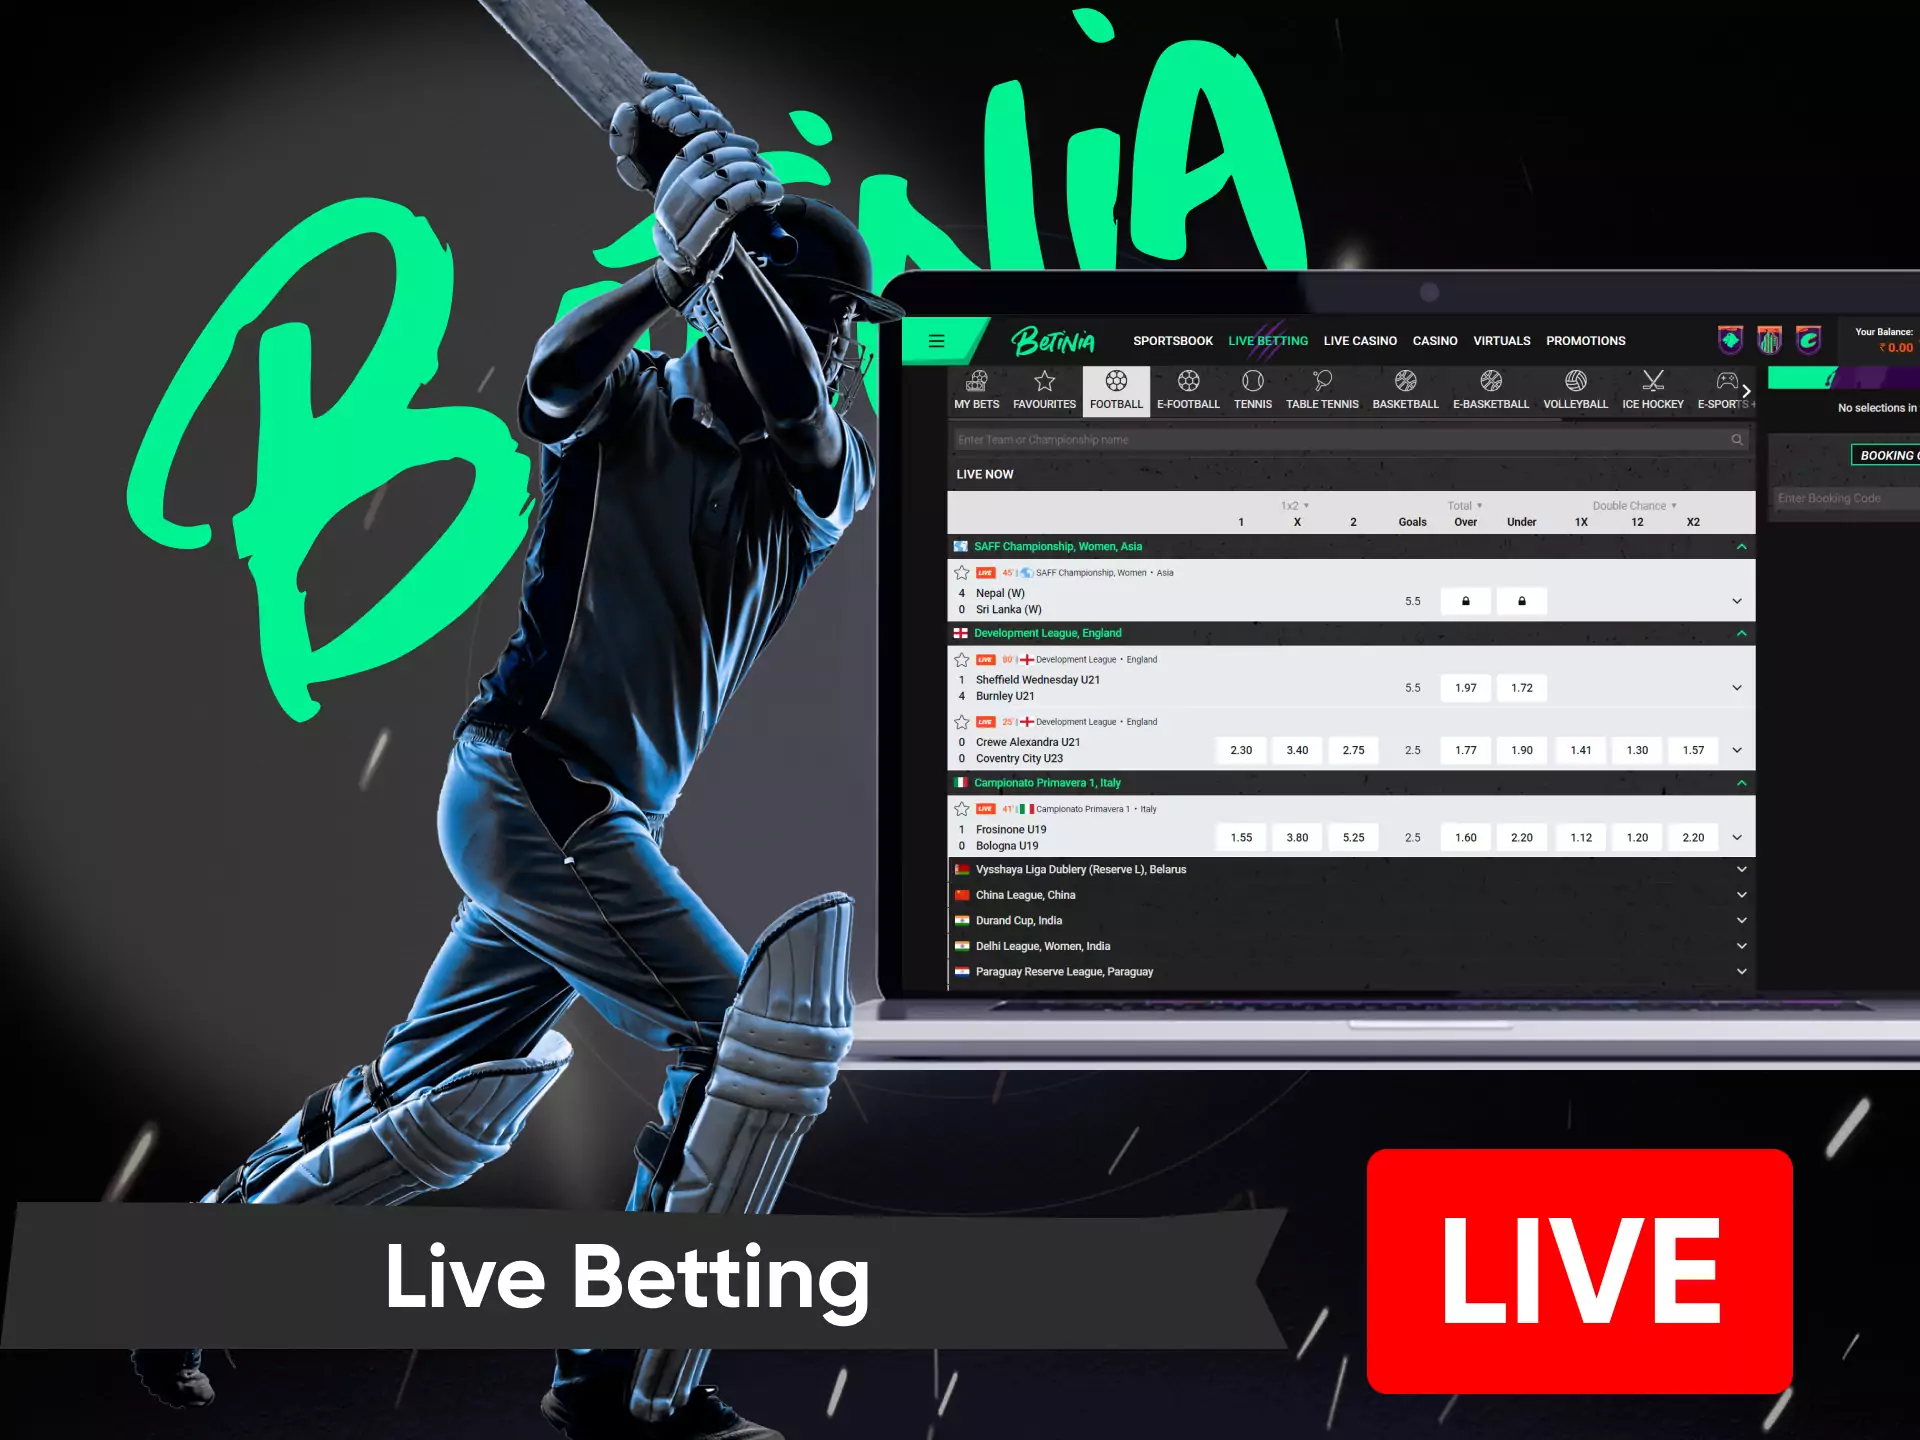 In the section of Betinia live betting, you can follow and bet on events.